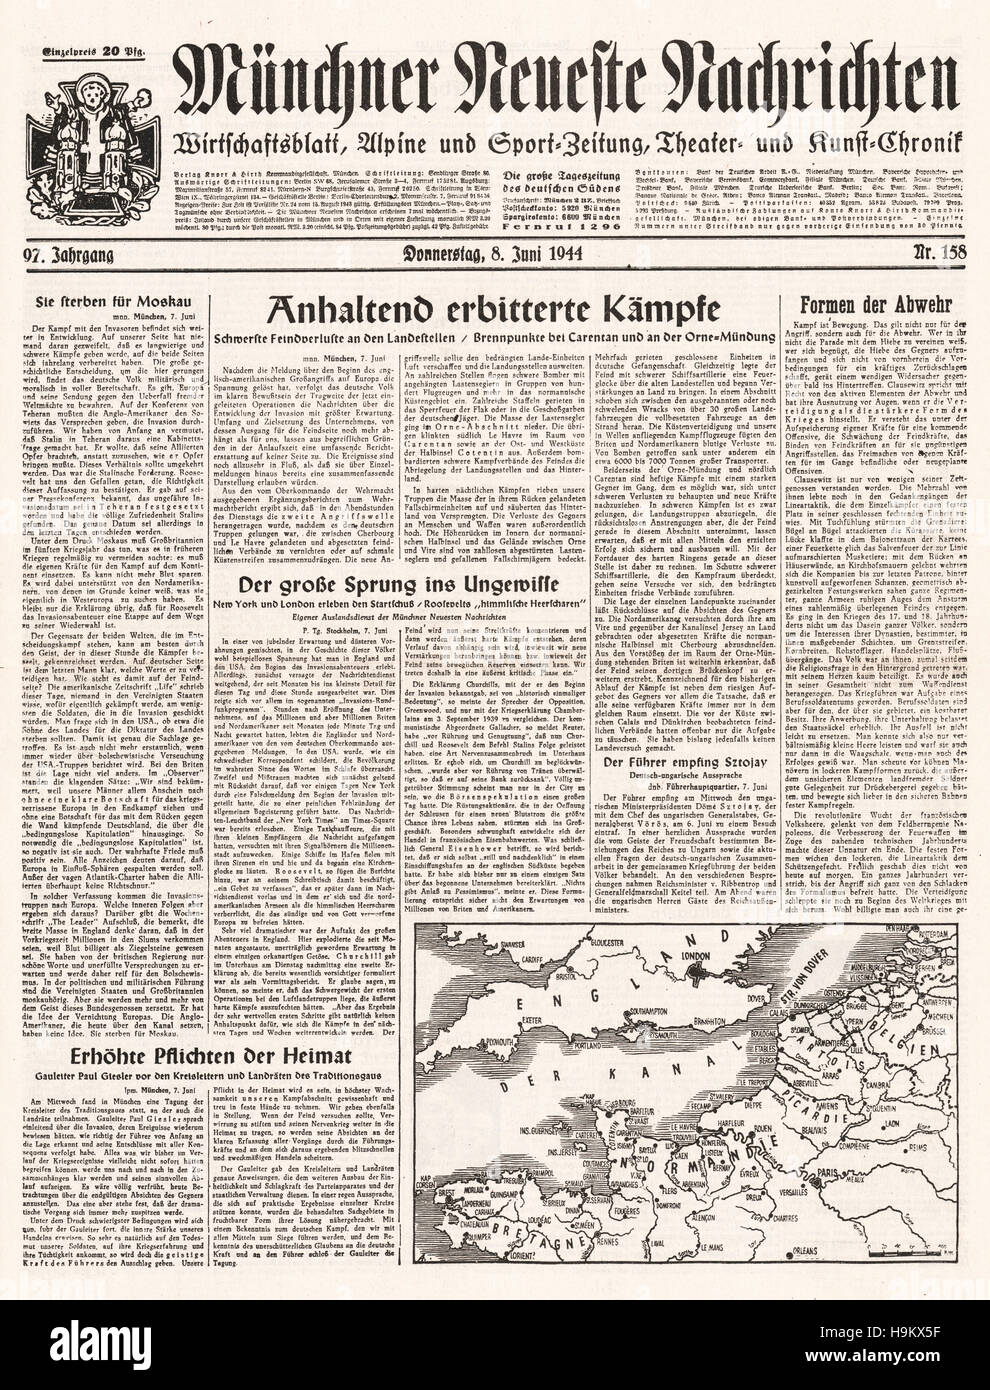 1944 Münchener Nachrichten (Germany) front page reporting the D-Day landings in Normandy, France Stock Photo